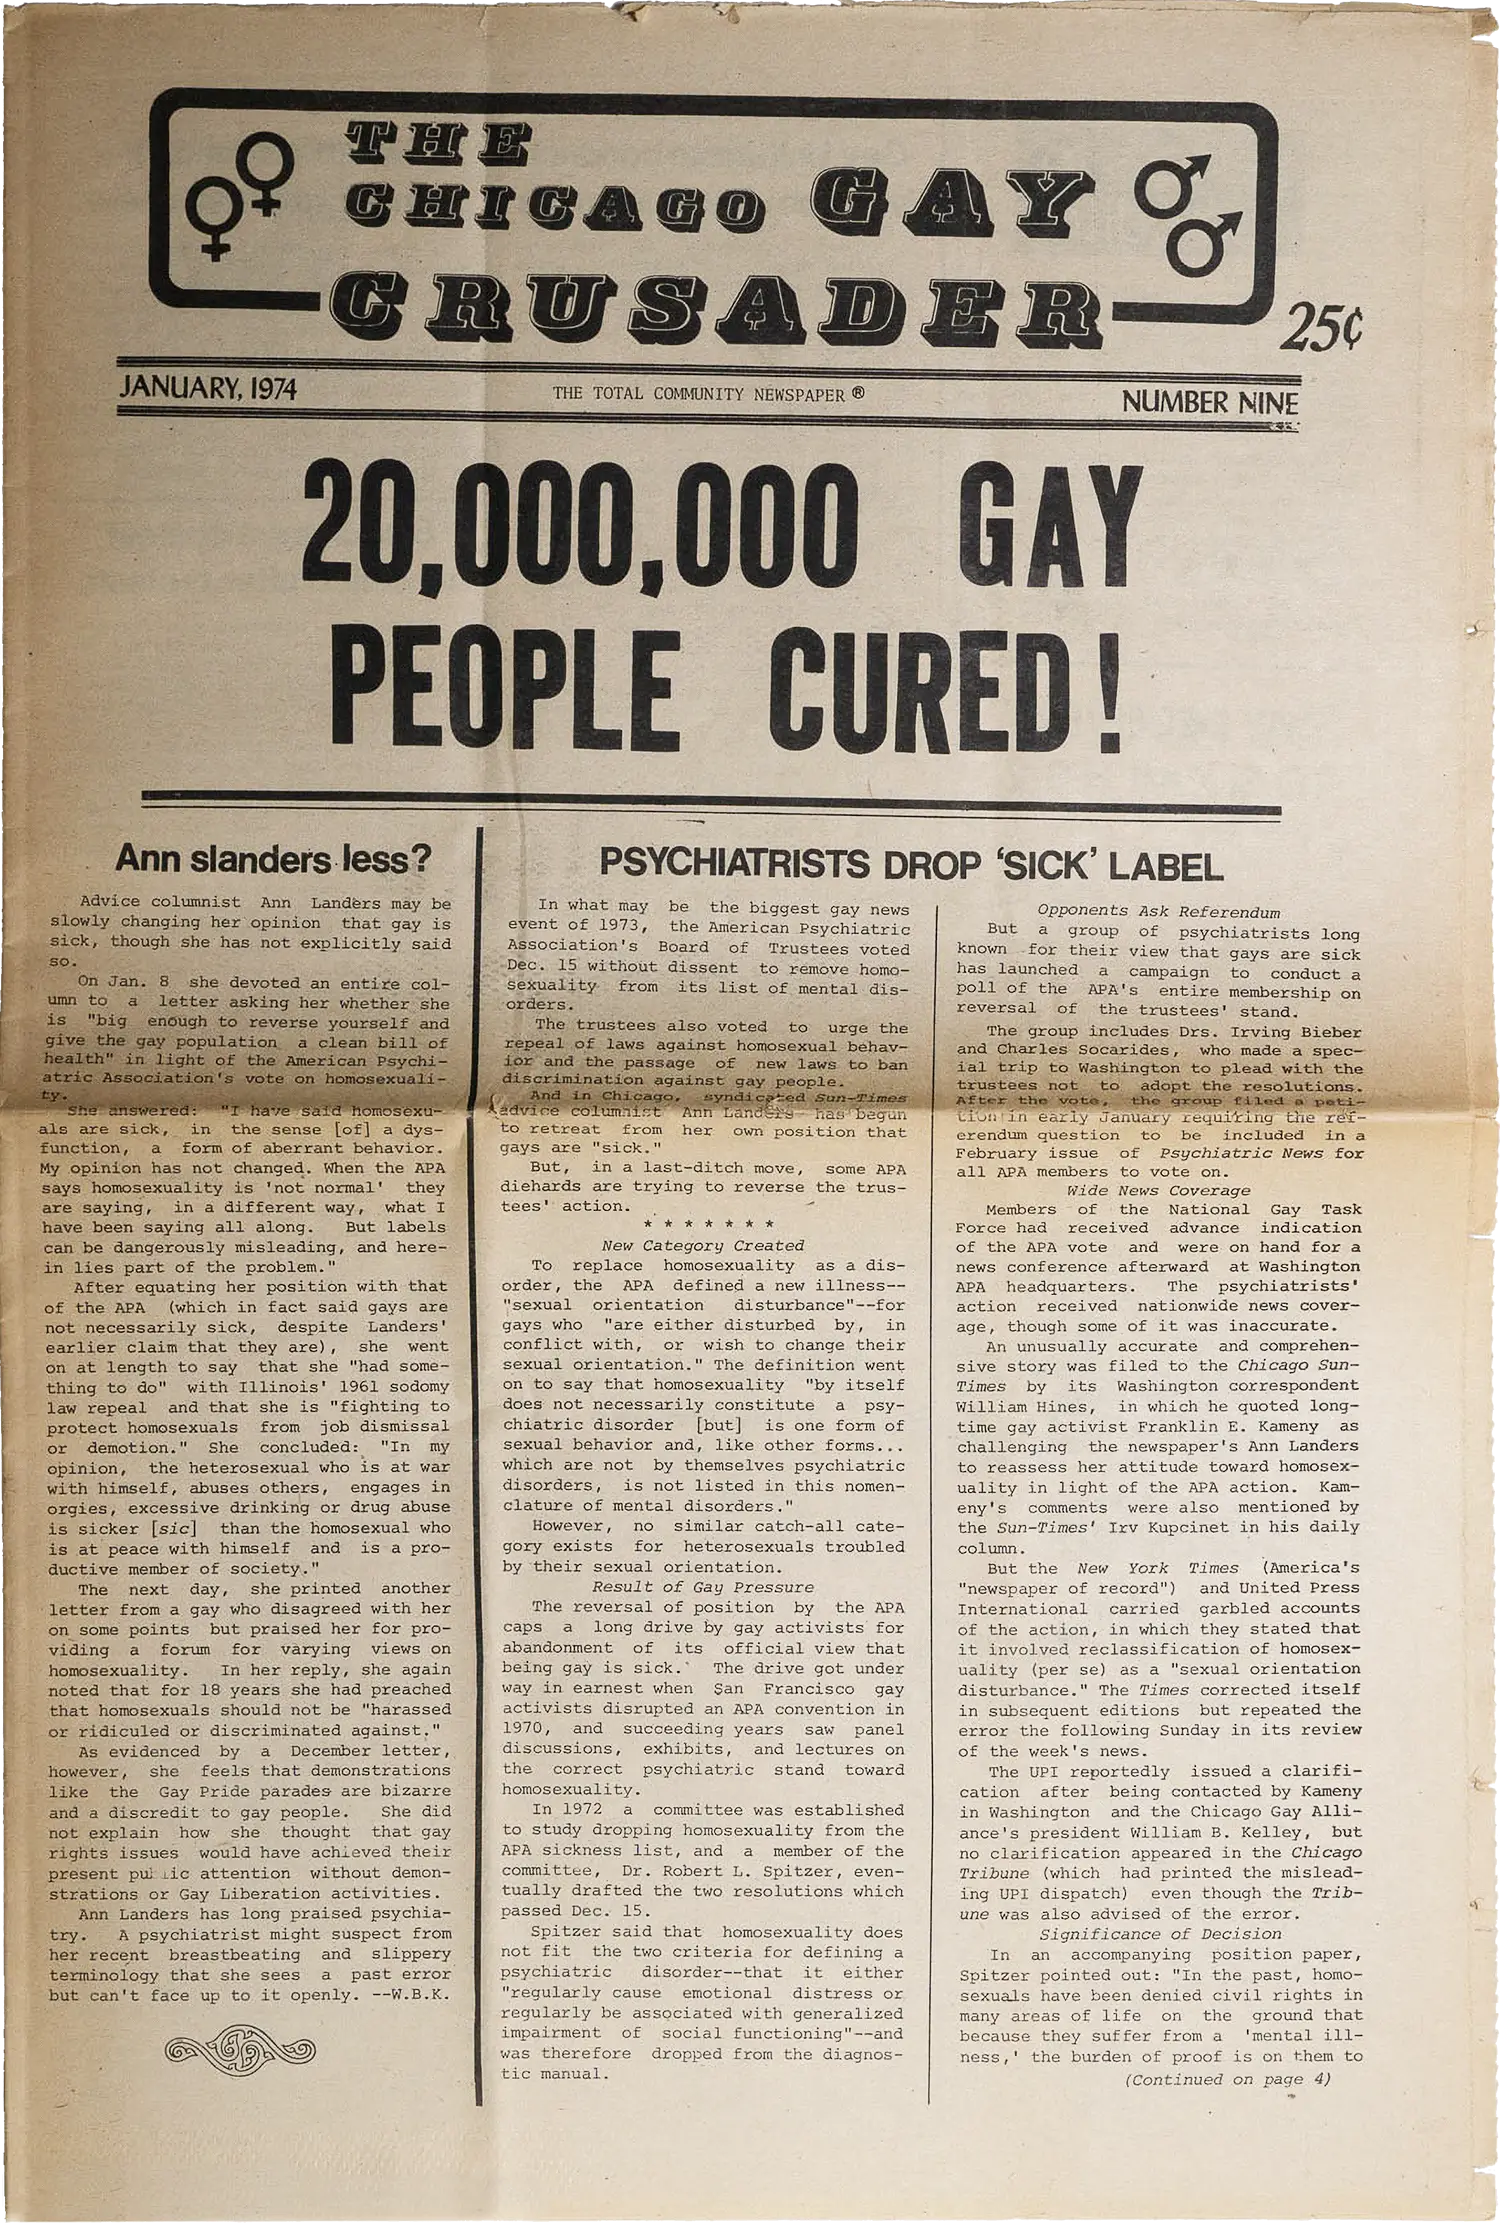 The cover of the Chicago Gay Crusader. The title says “20,000,000 Gay People Cured!” and the subtitle says “Psychiatrists drop ‘sick’ label.”